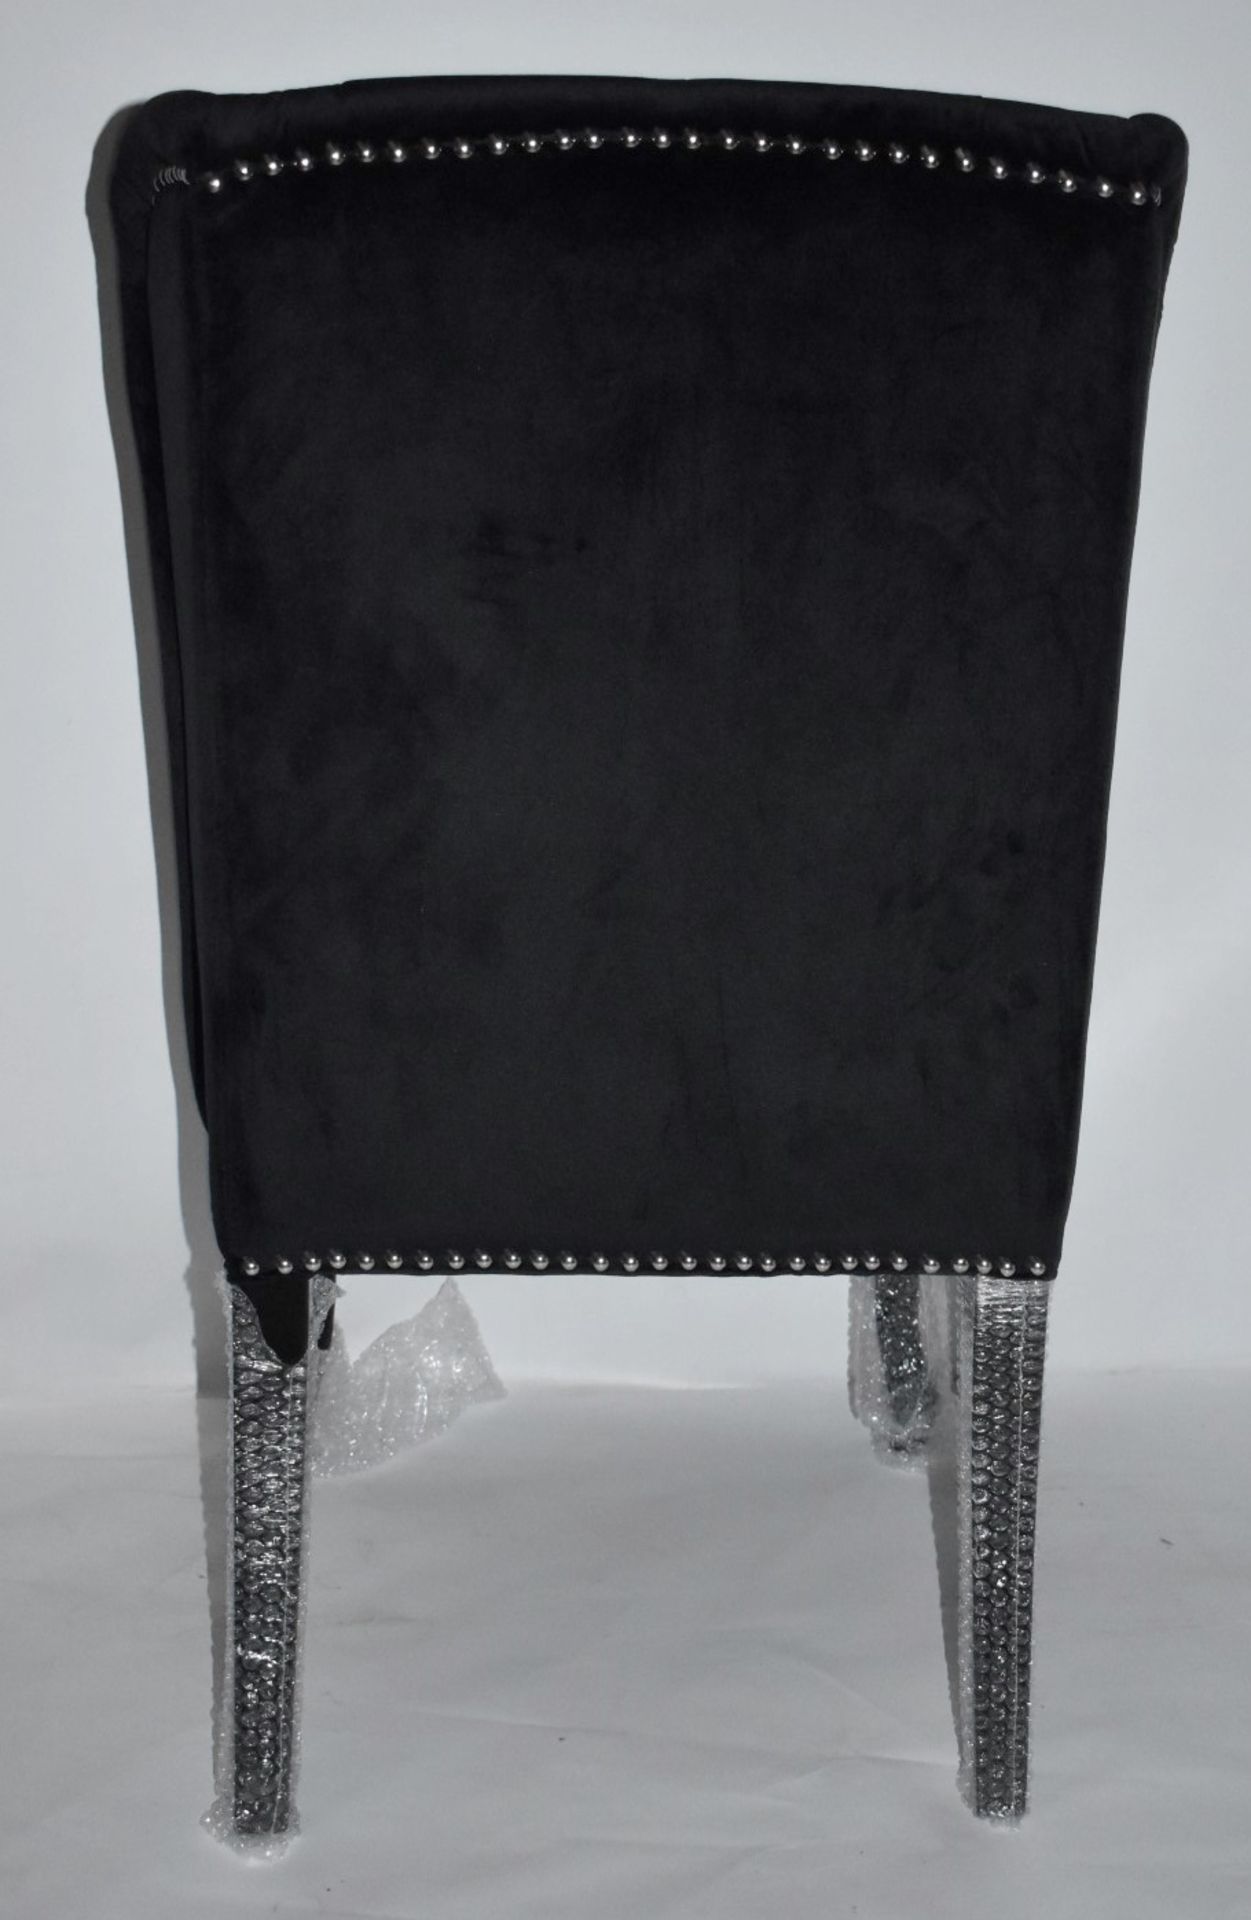 6 x HOUSE OF SPARKLES Luxury Wing Back Dining Chairs Richly Upholstered In BLACK Velvet - Brand - Image 6 of 11